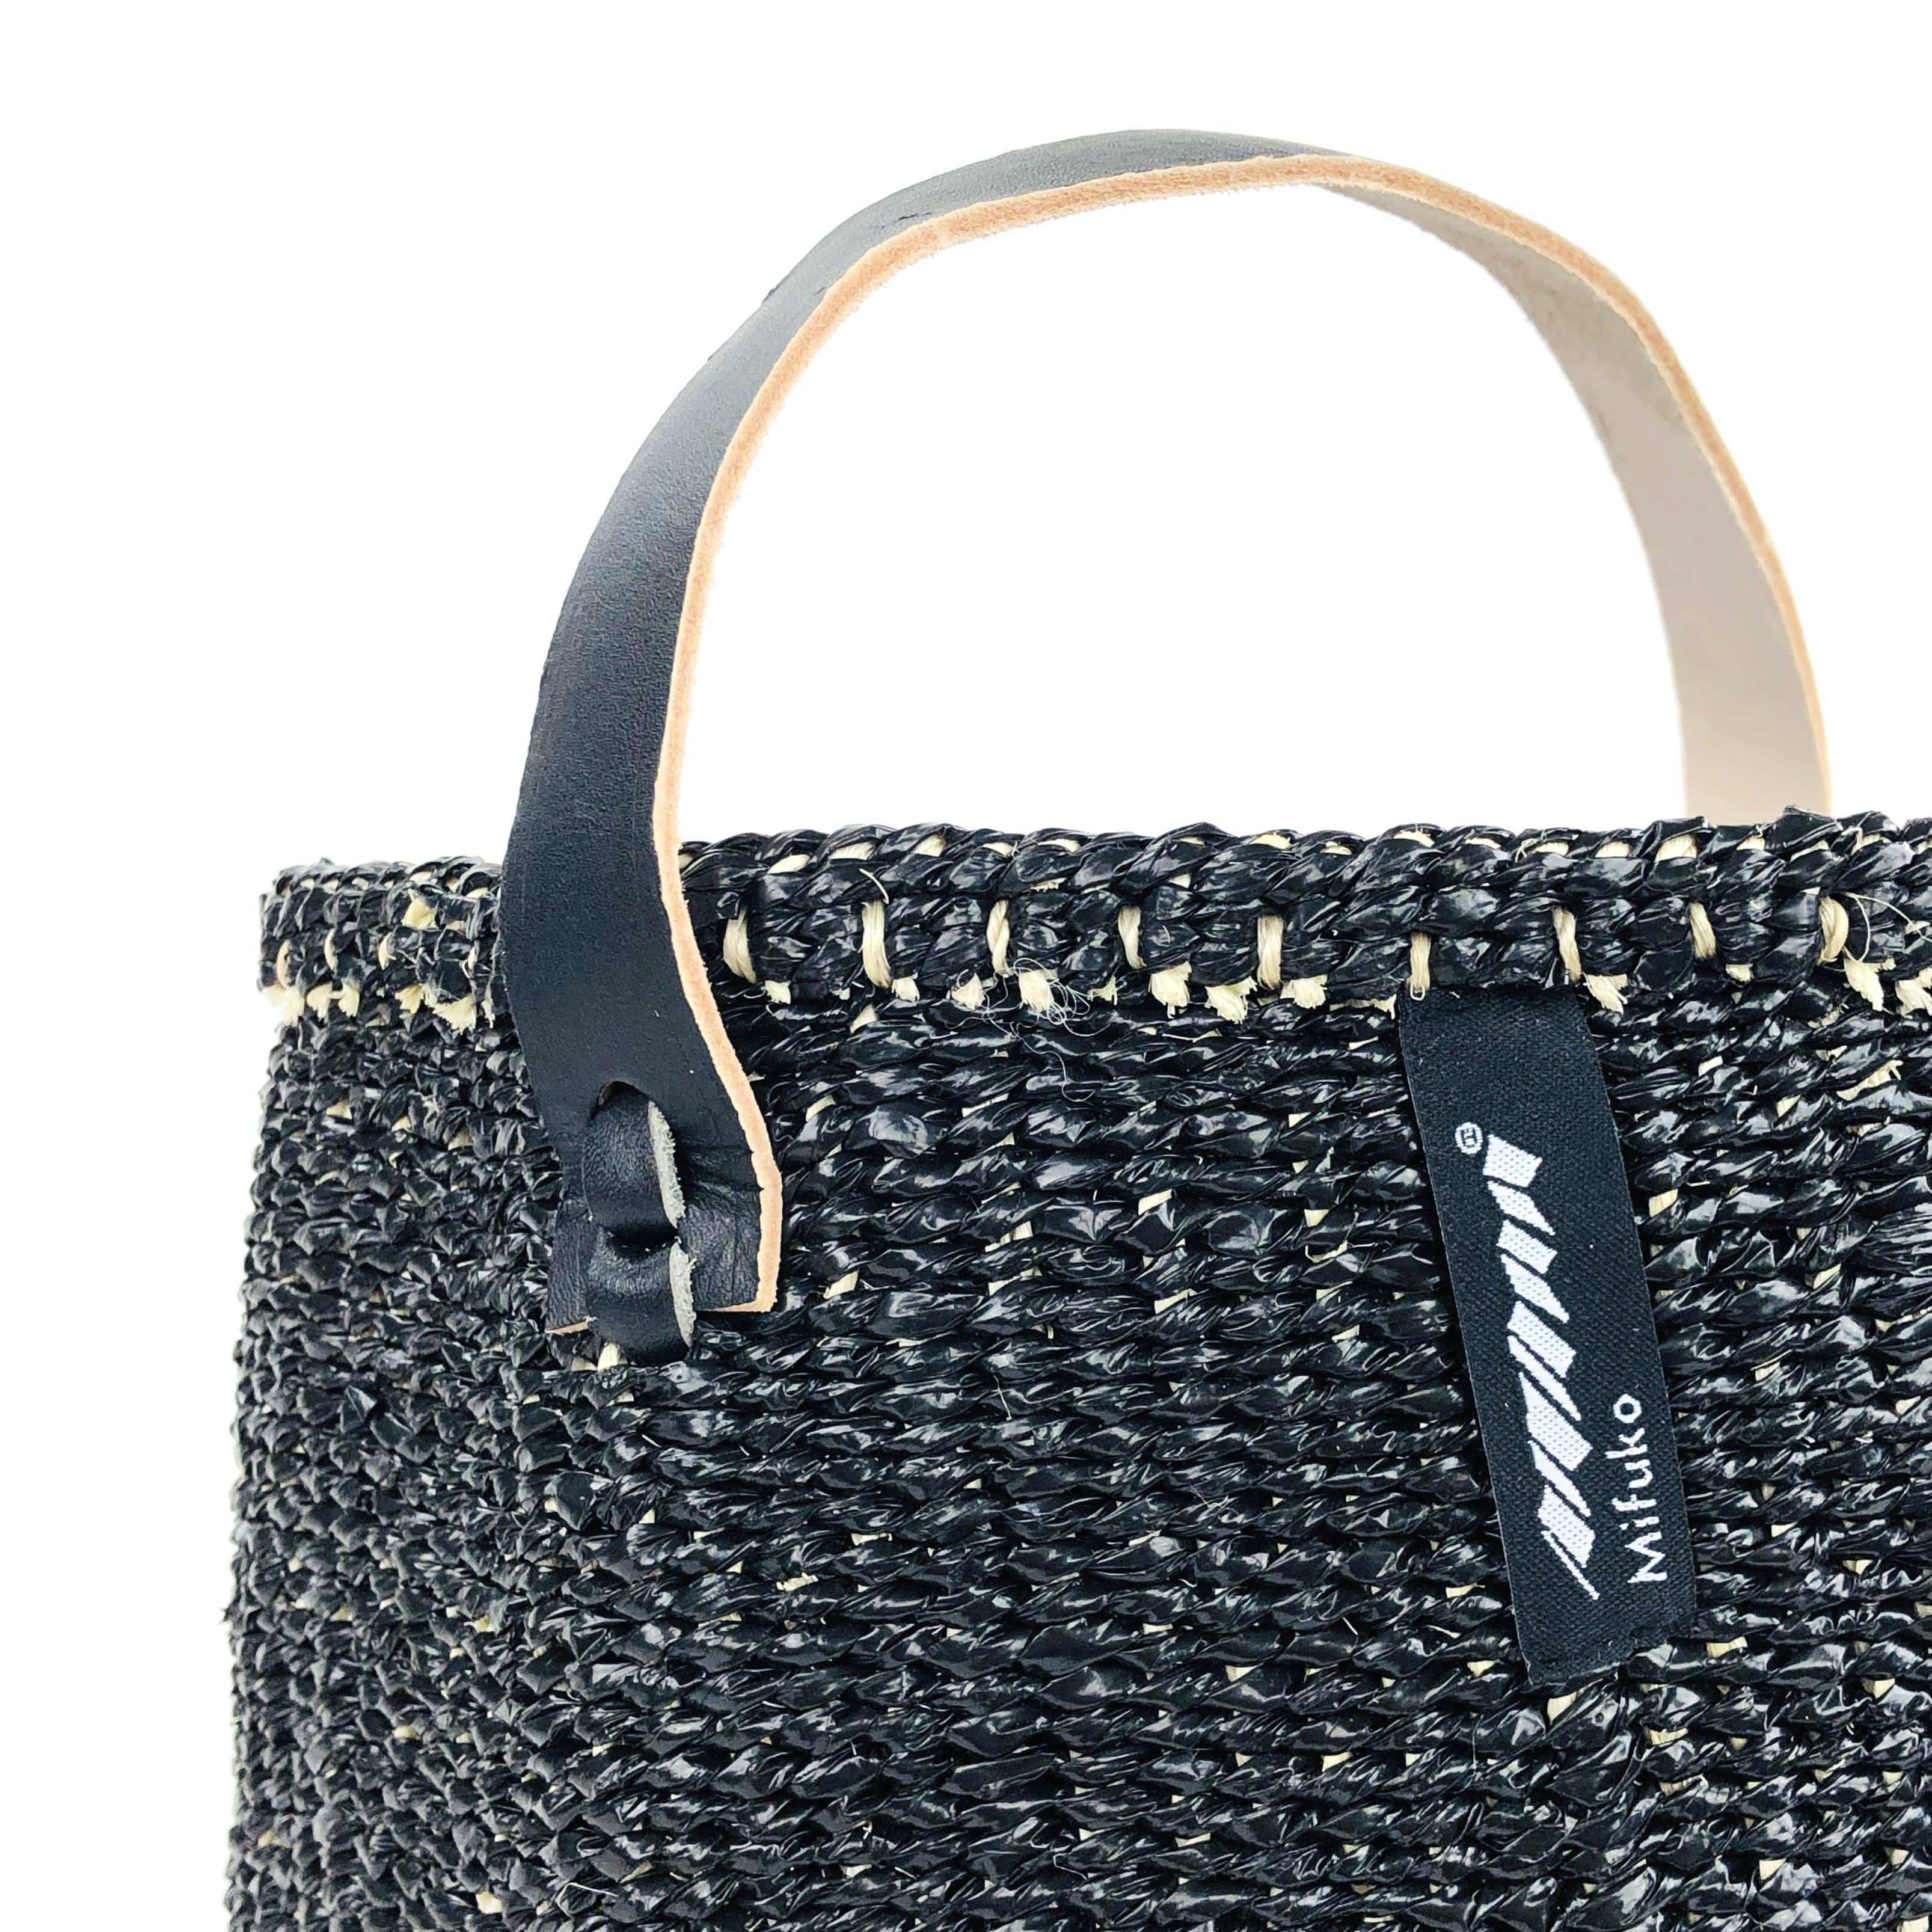 Handmade fair trade Partly recycled plastic and sisal Kiondo basket | Black with handle S